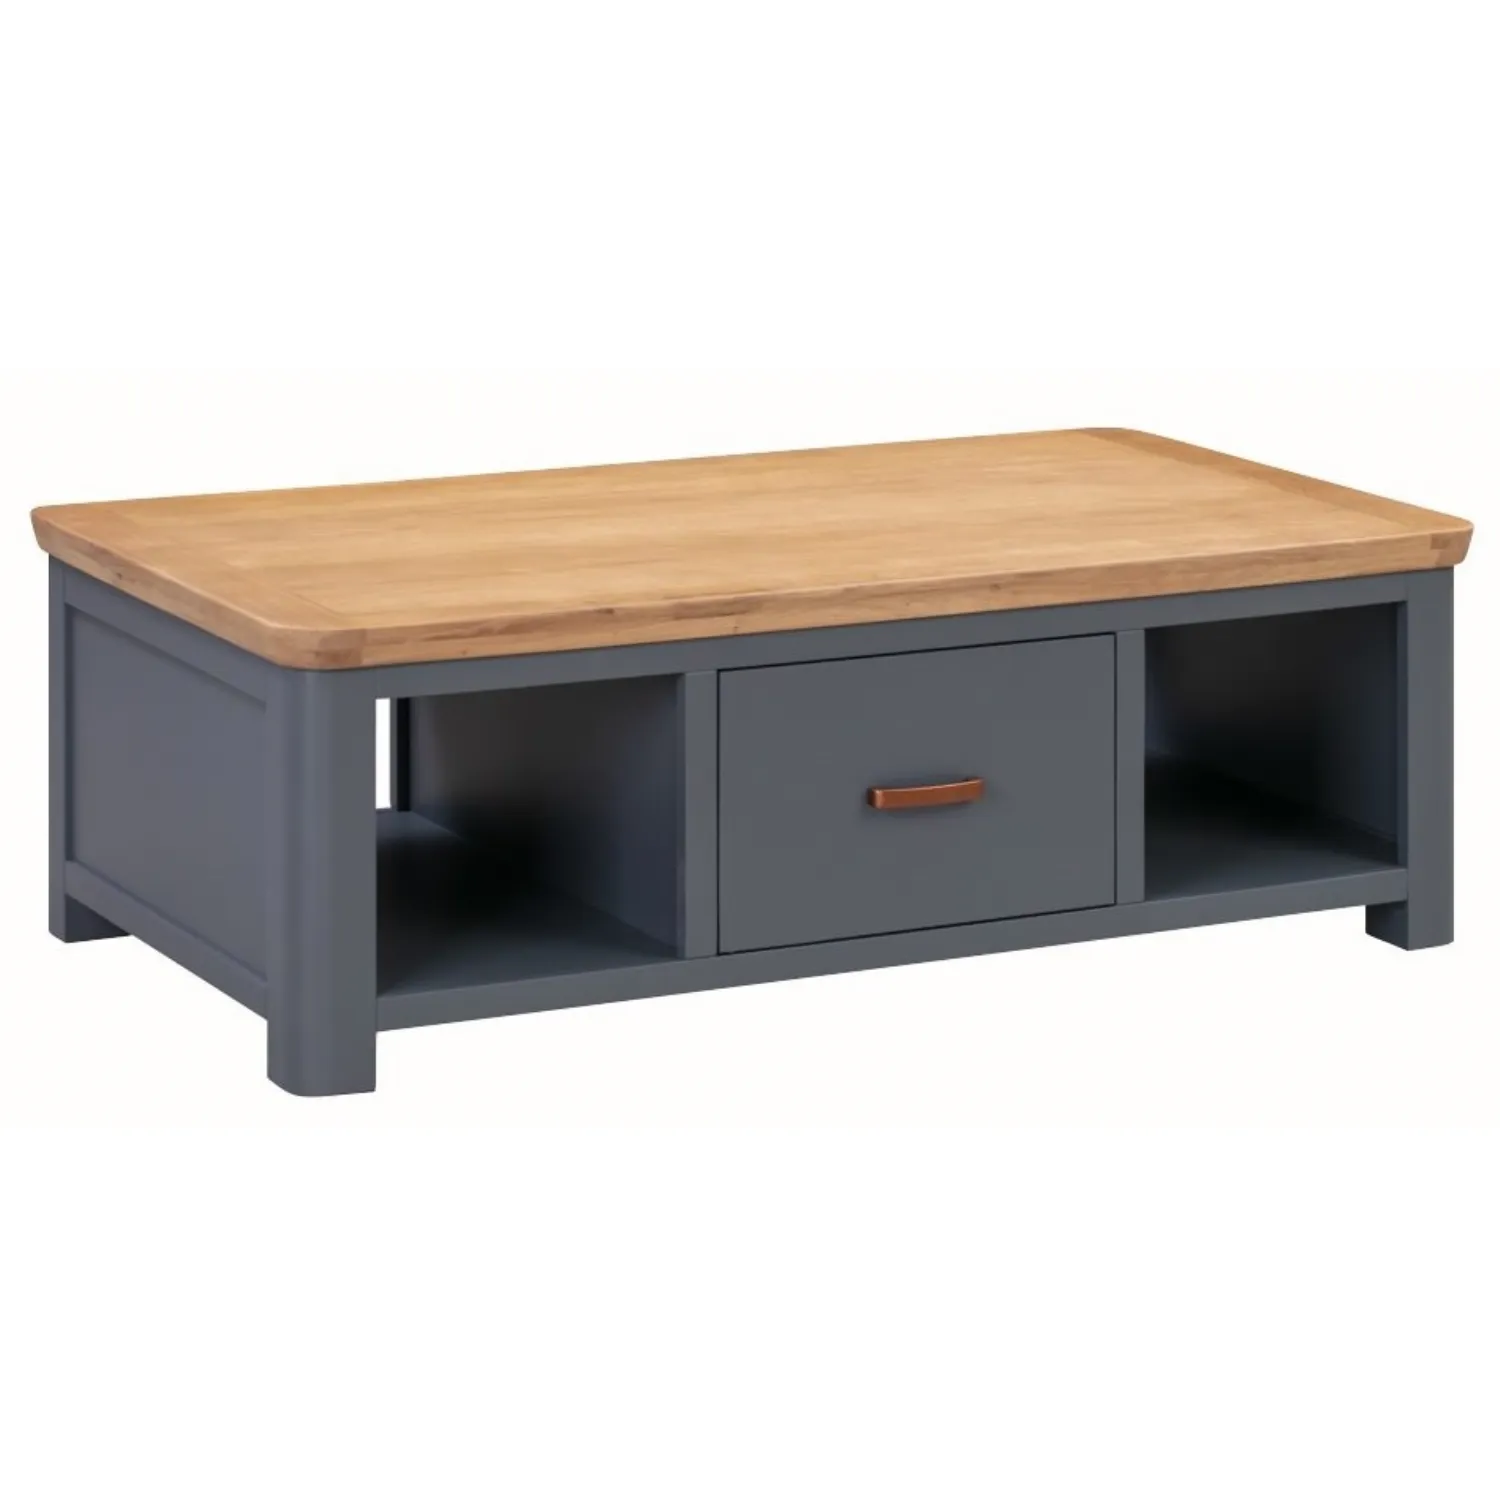 Solid Oak and Blue Large Coffee Table